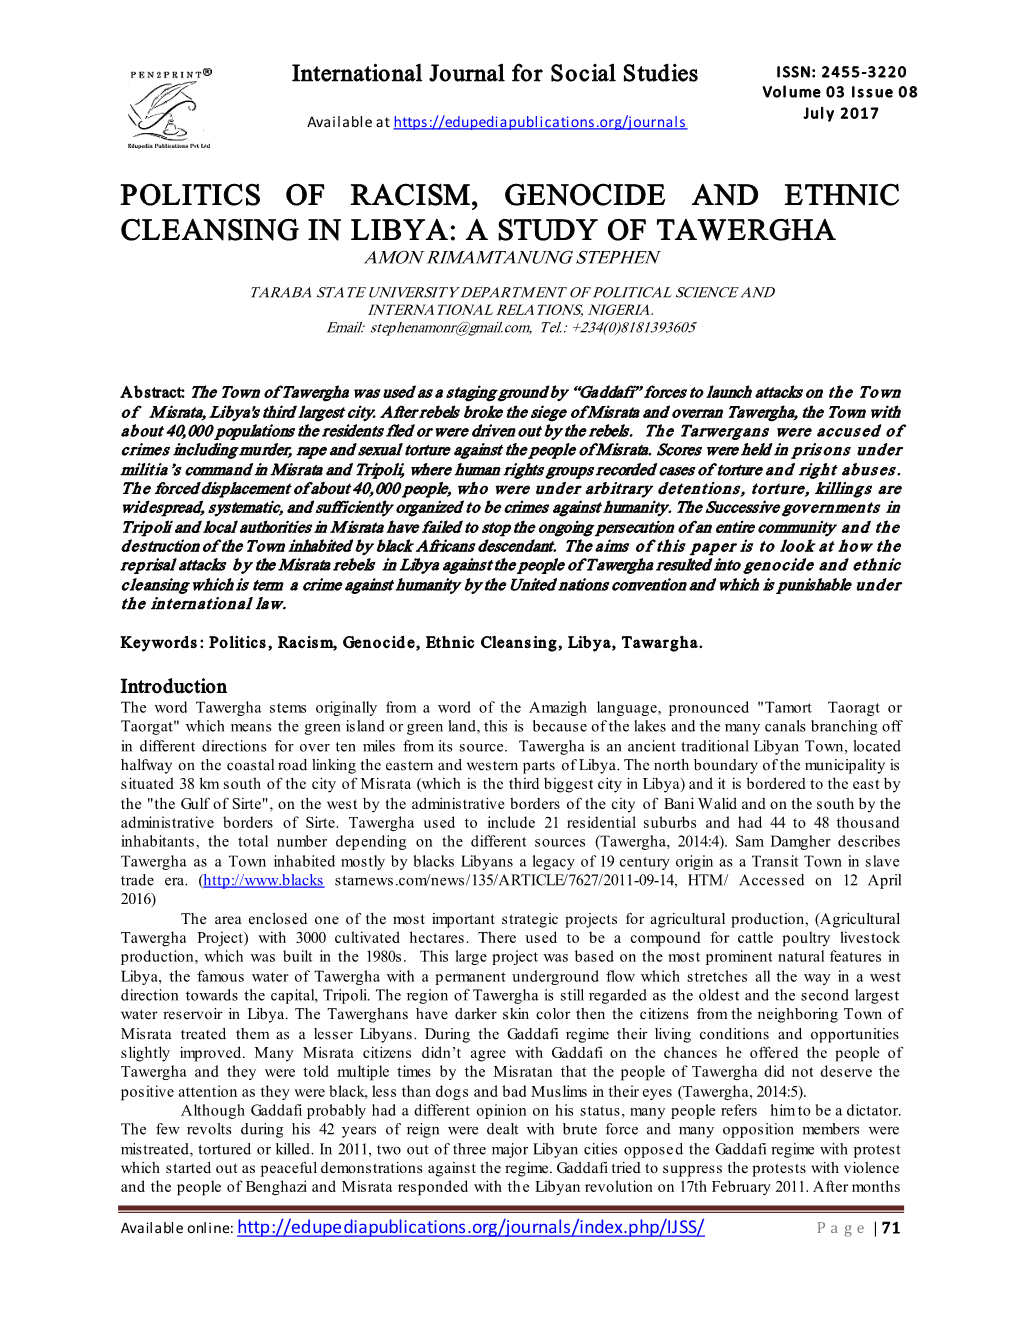 Politics of Racism, Genocide and Ethnic Cleansing in Libya: a Study of Tawergha Amon Rimamtanung Stephen